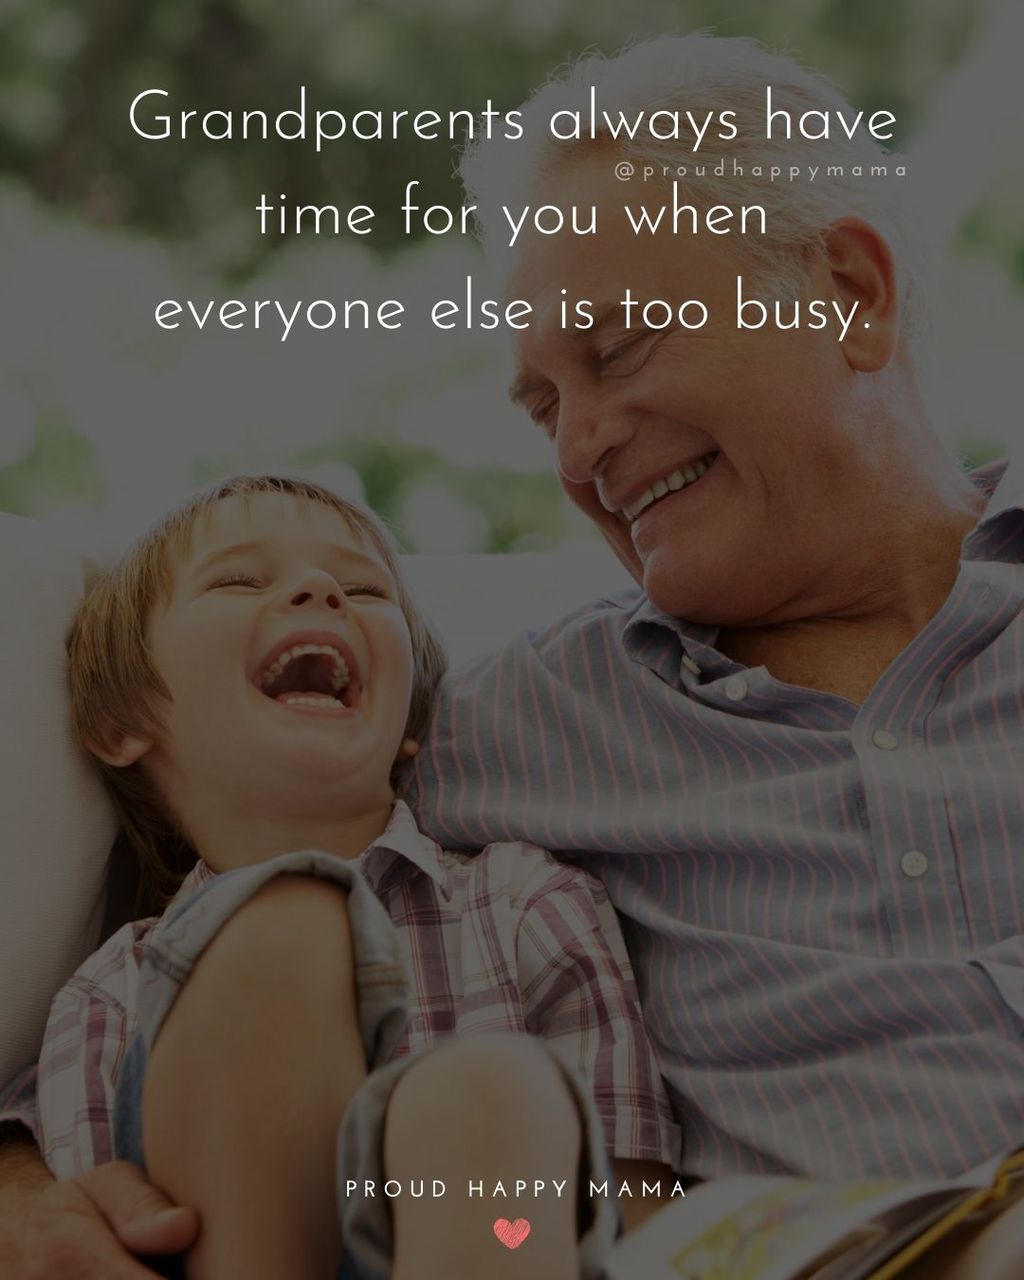 Grandfather Quotes From Grandchildren | Grandparents always have time for you when everyone else is too busy.